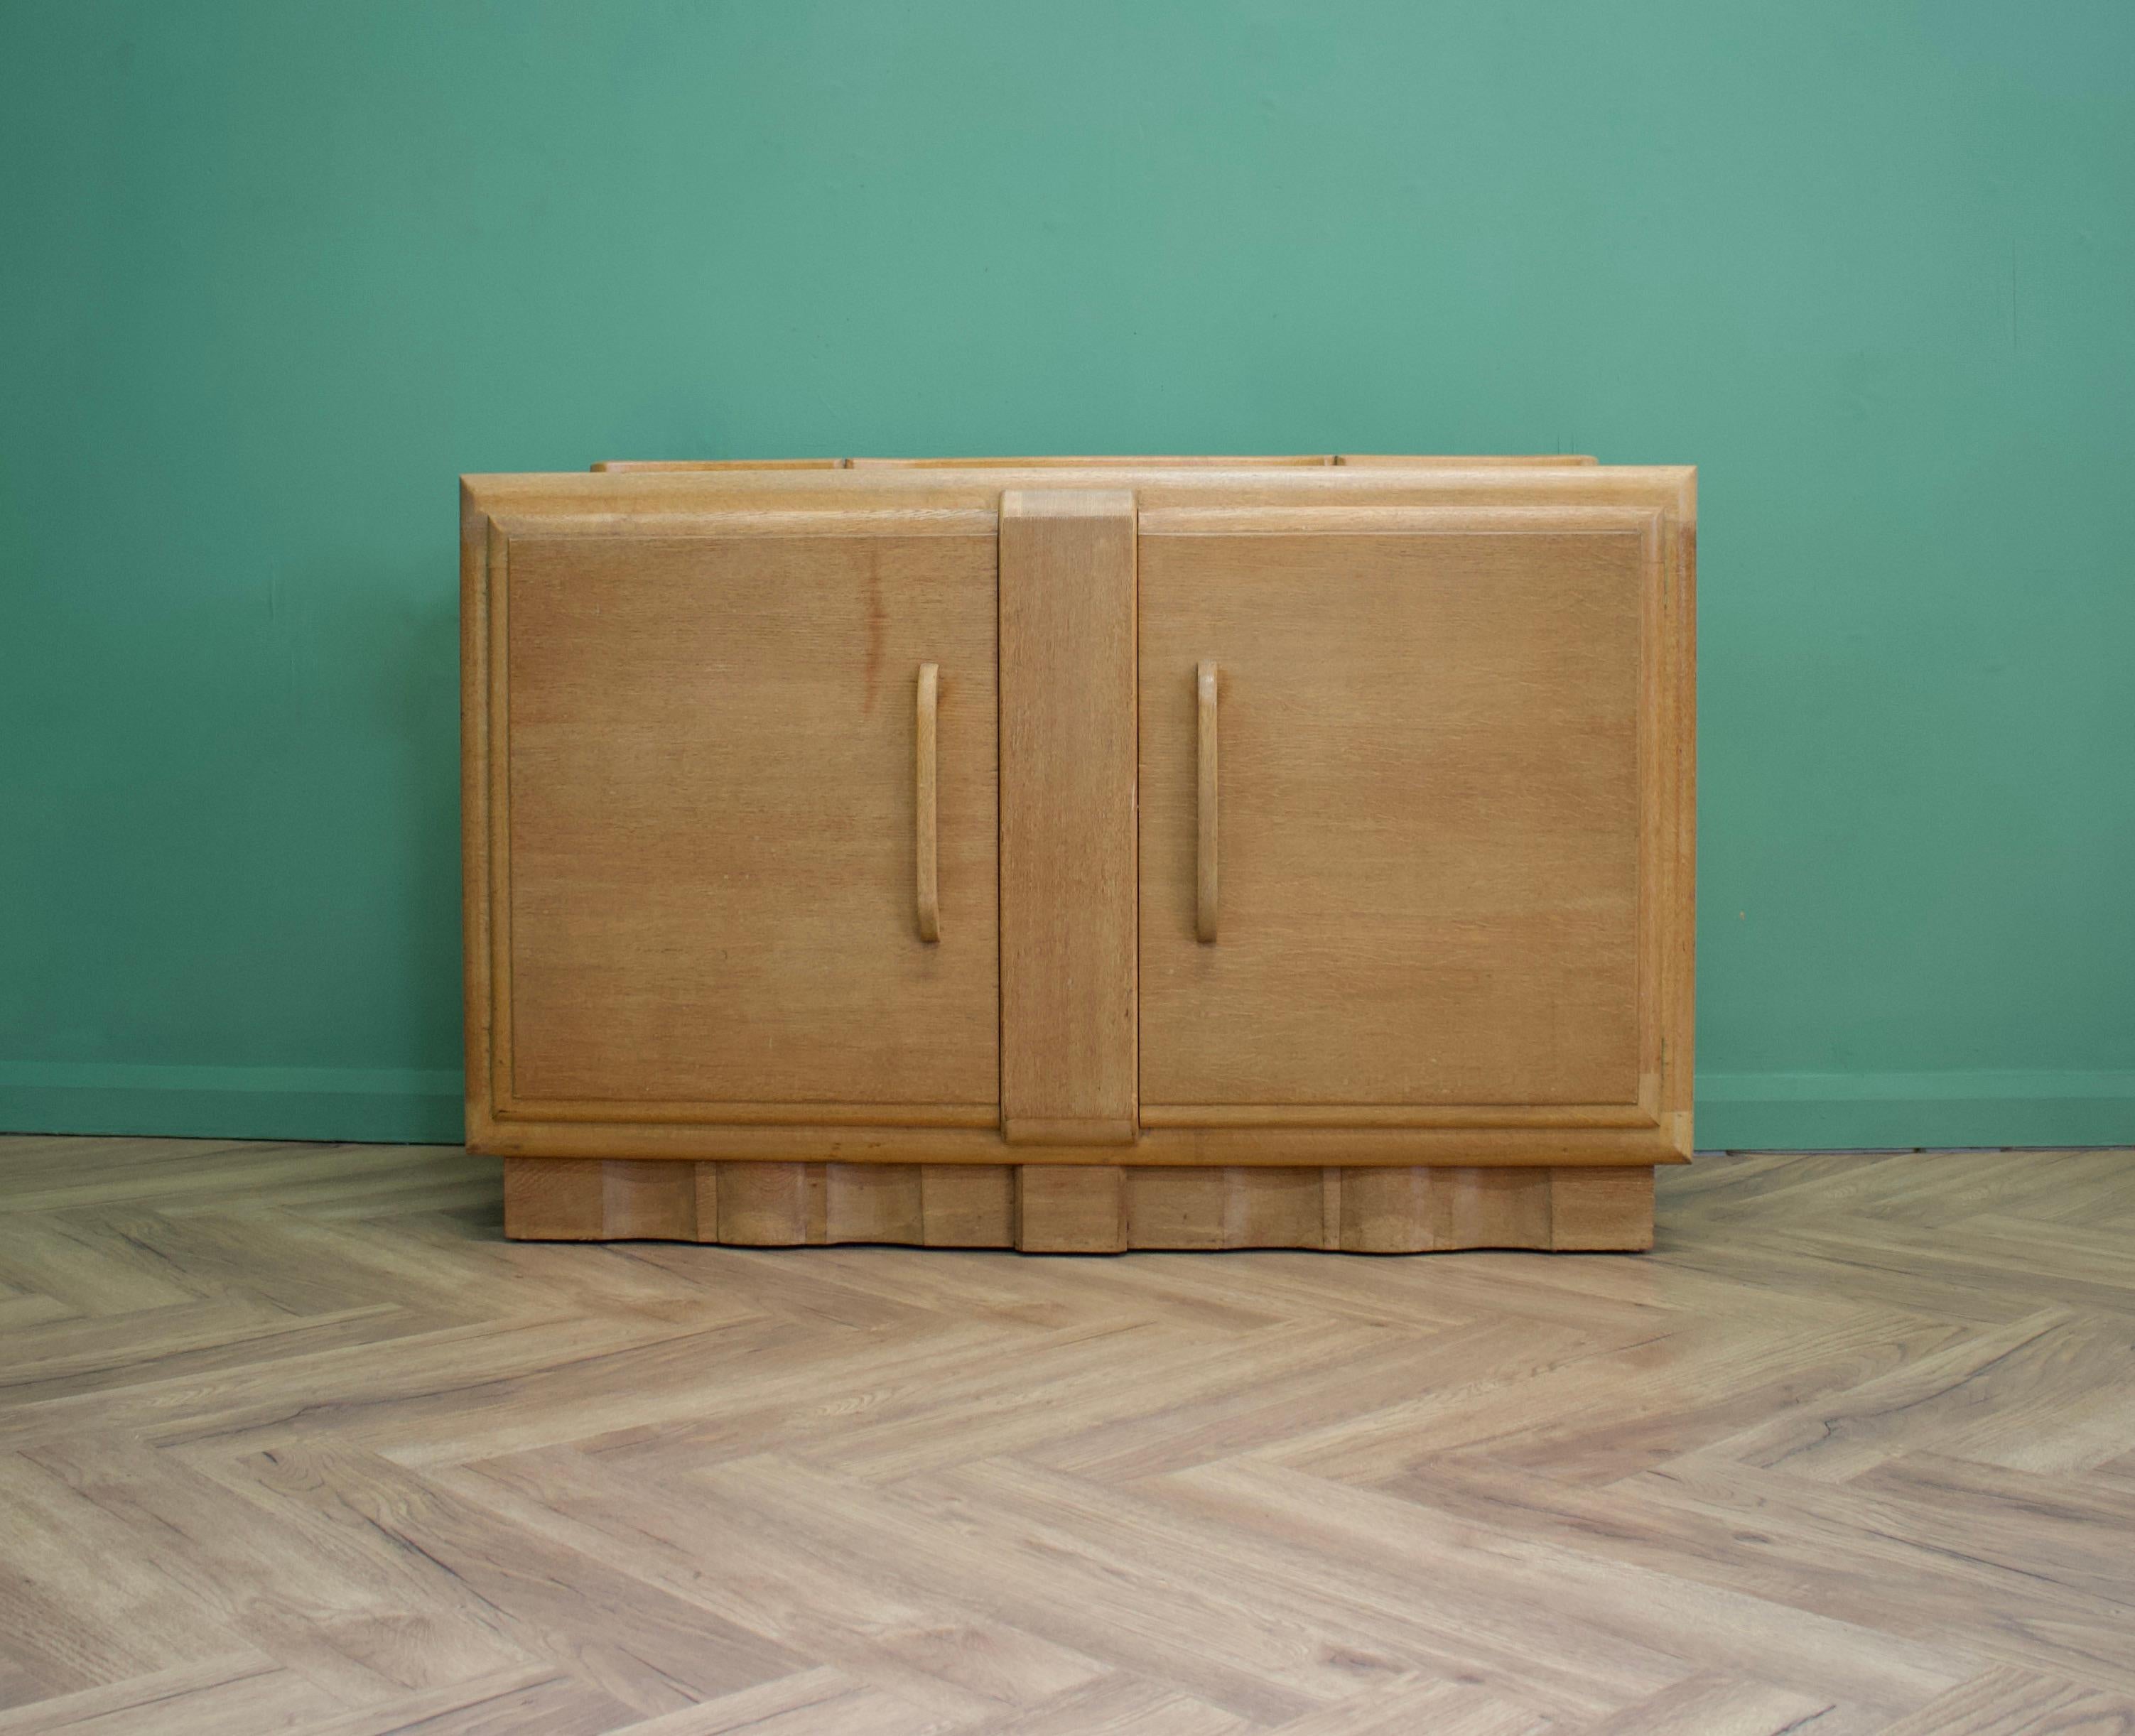 A beautiful quality limed oak vintage Art Deco sideboard from R H Whittle and Sons - dating from the 1930s

In the style of Heals

Featuring 3 drawers and two cupboards - with internal drawers and shelves.

